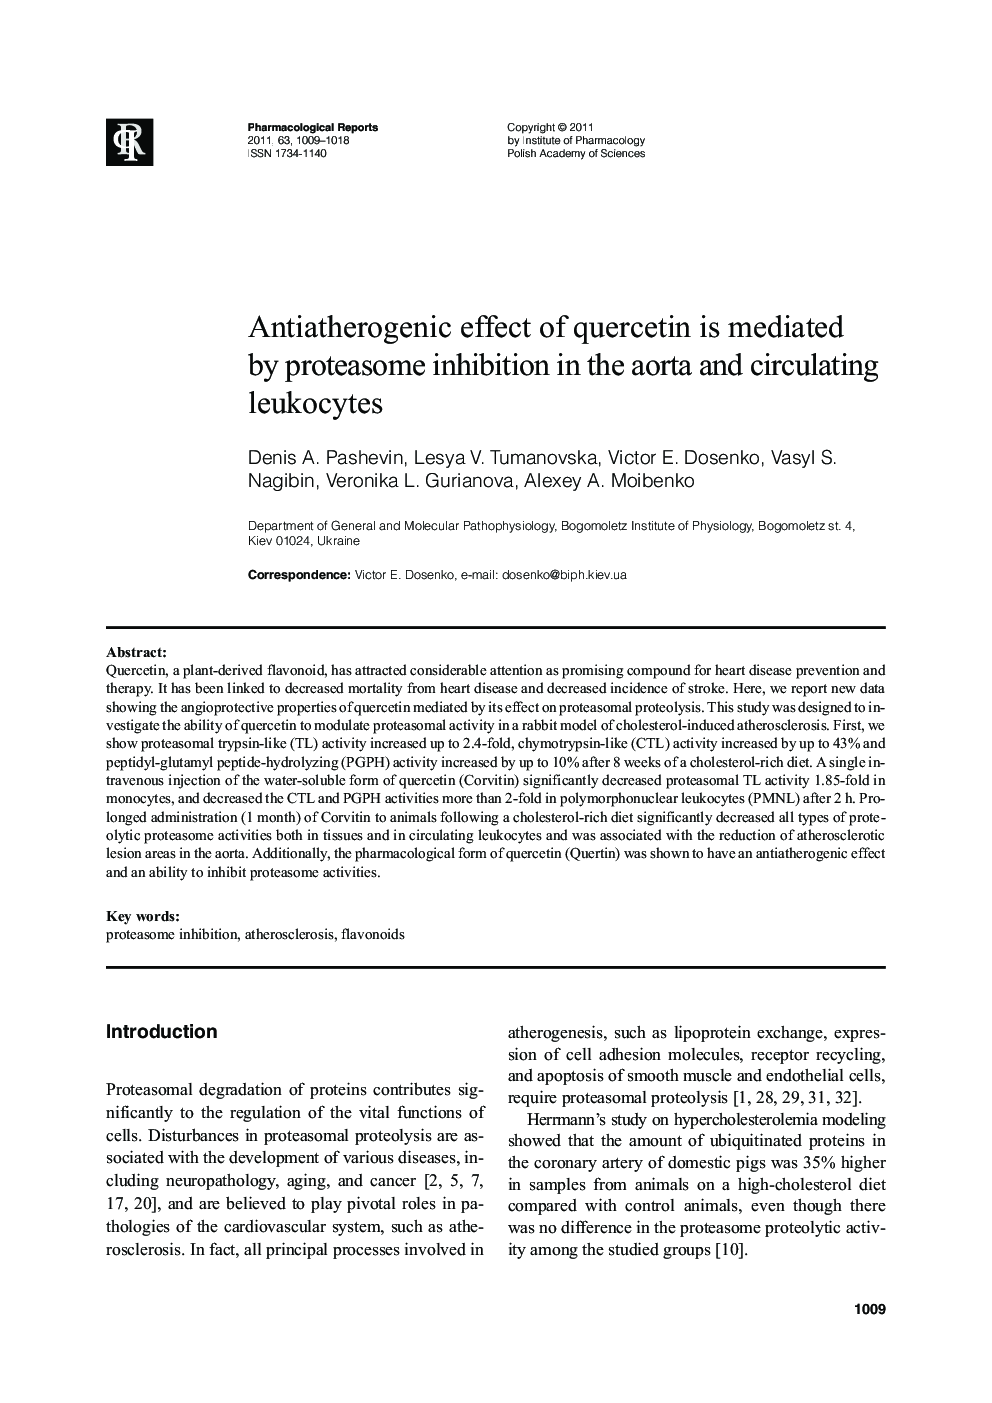 Antiatherogenic effect of quercetin is mediated by proteasome inhibition in the aorta and circulating leukocytes